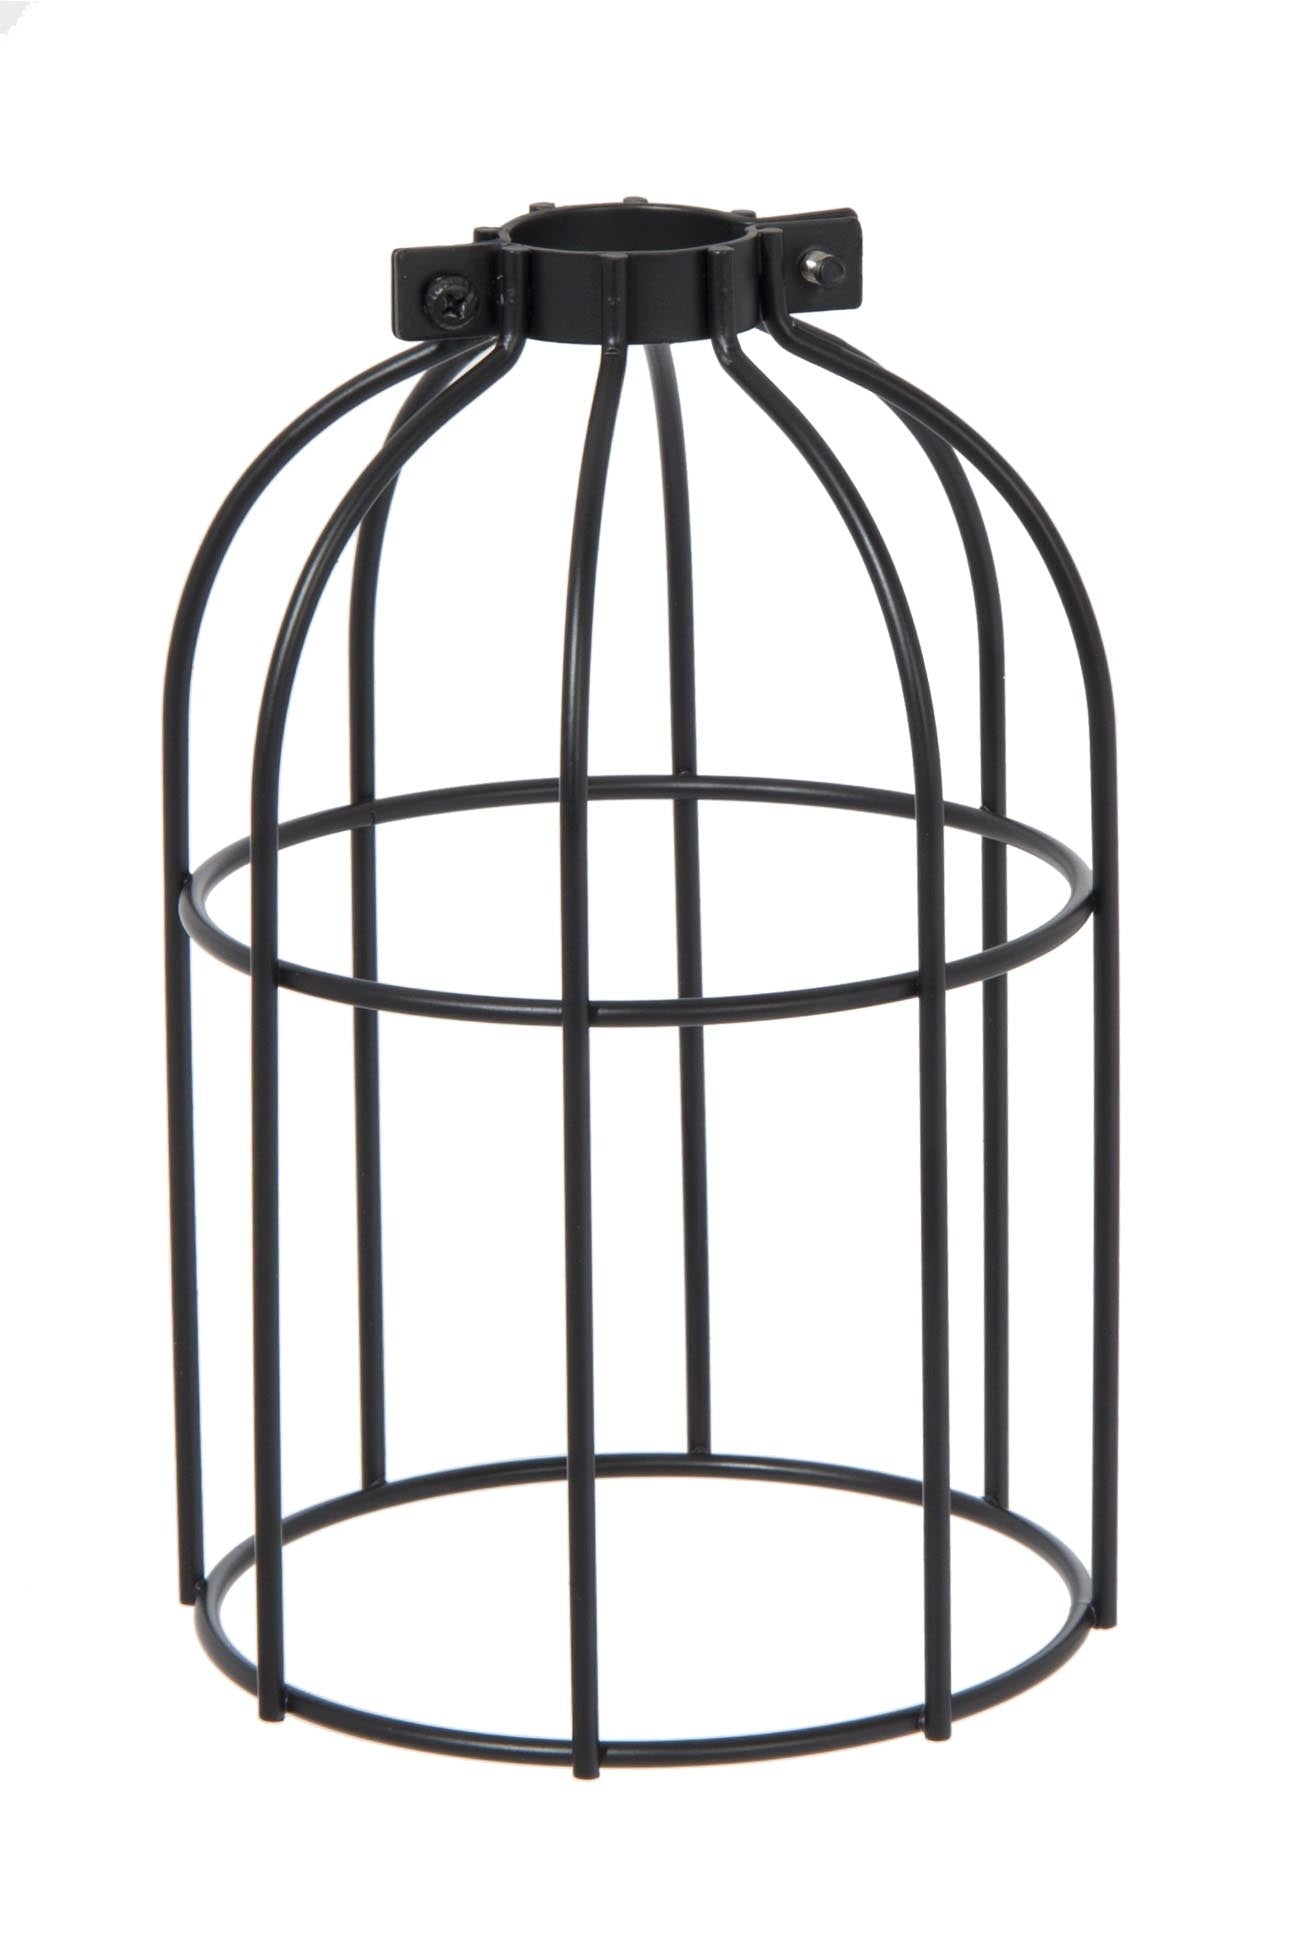 Satin Black Finish Steel Wire Bulb Cage, Clamp On Socket Type